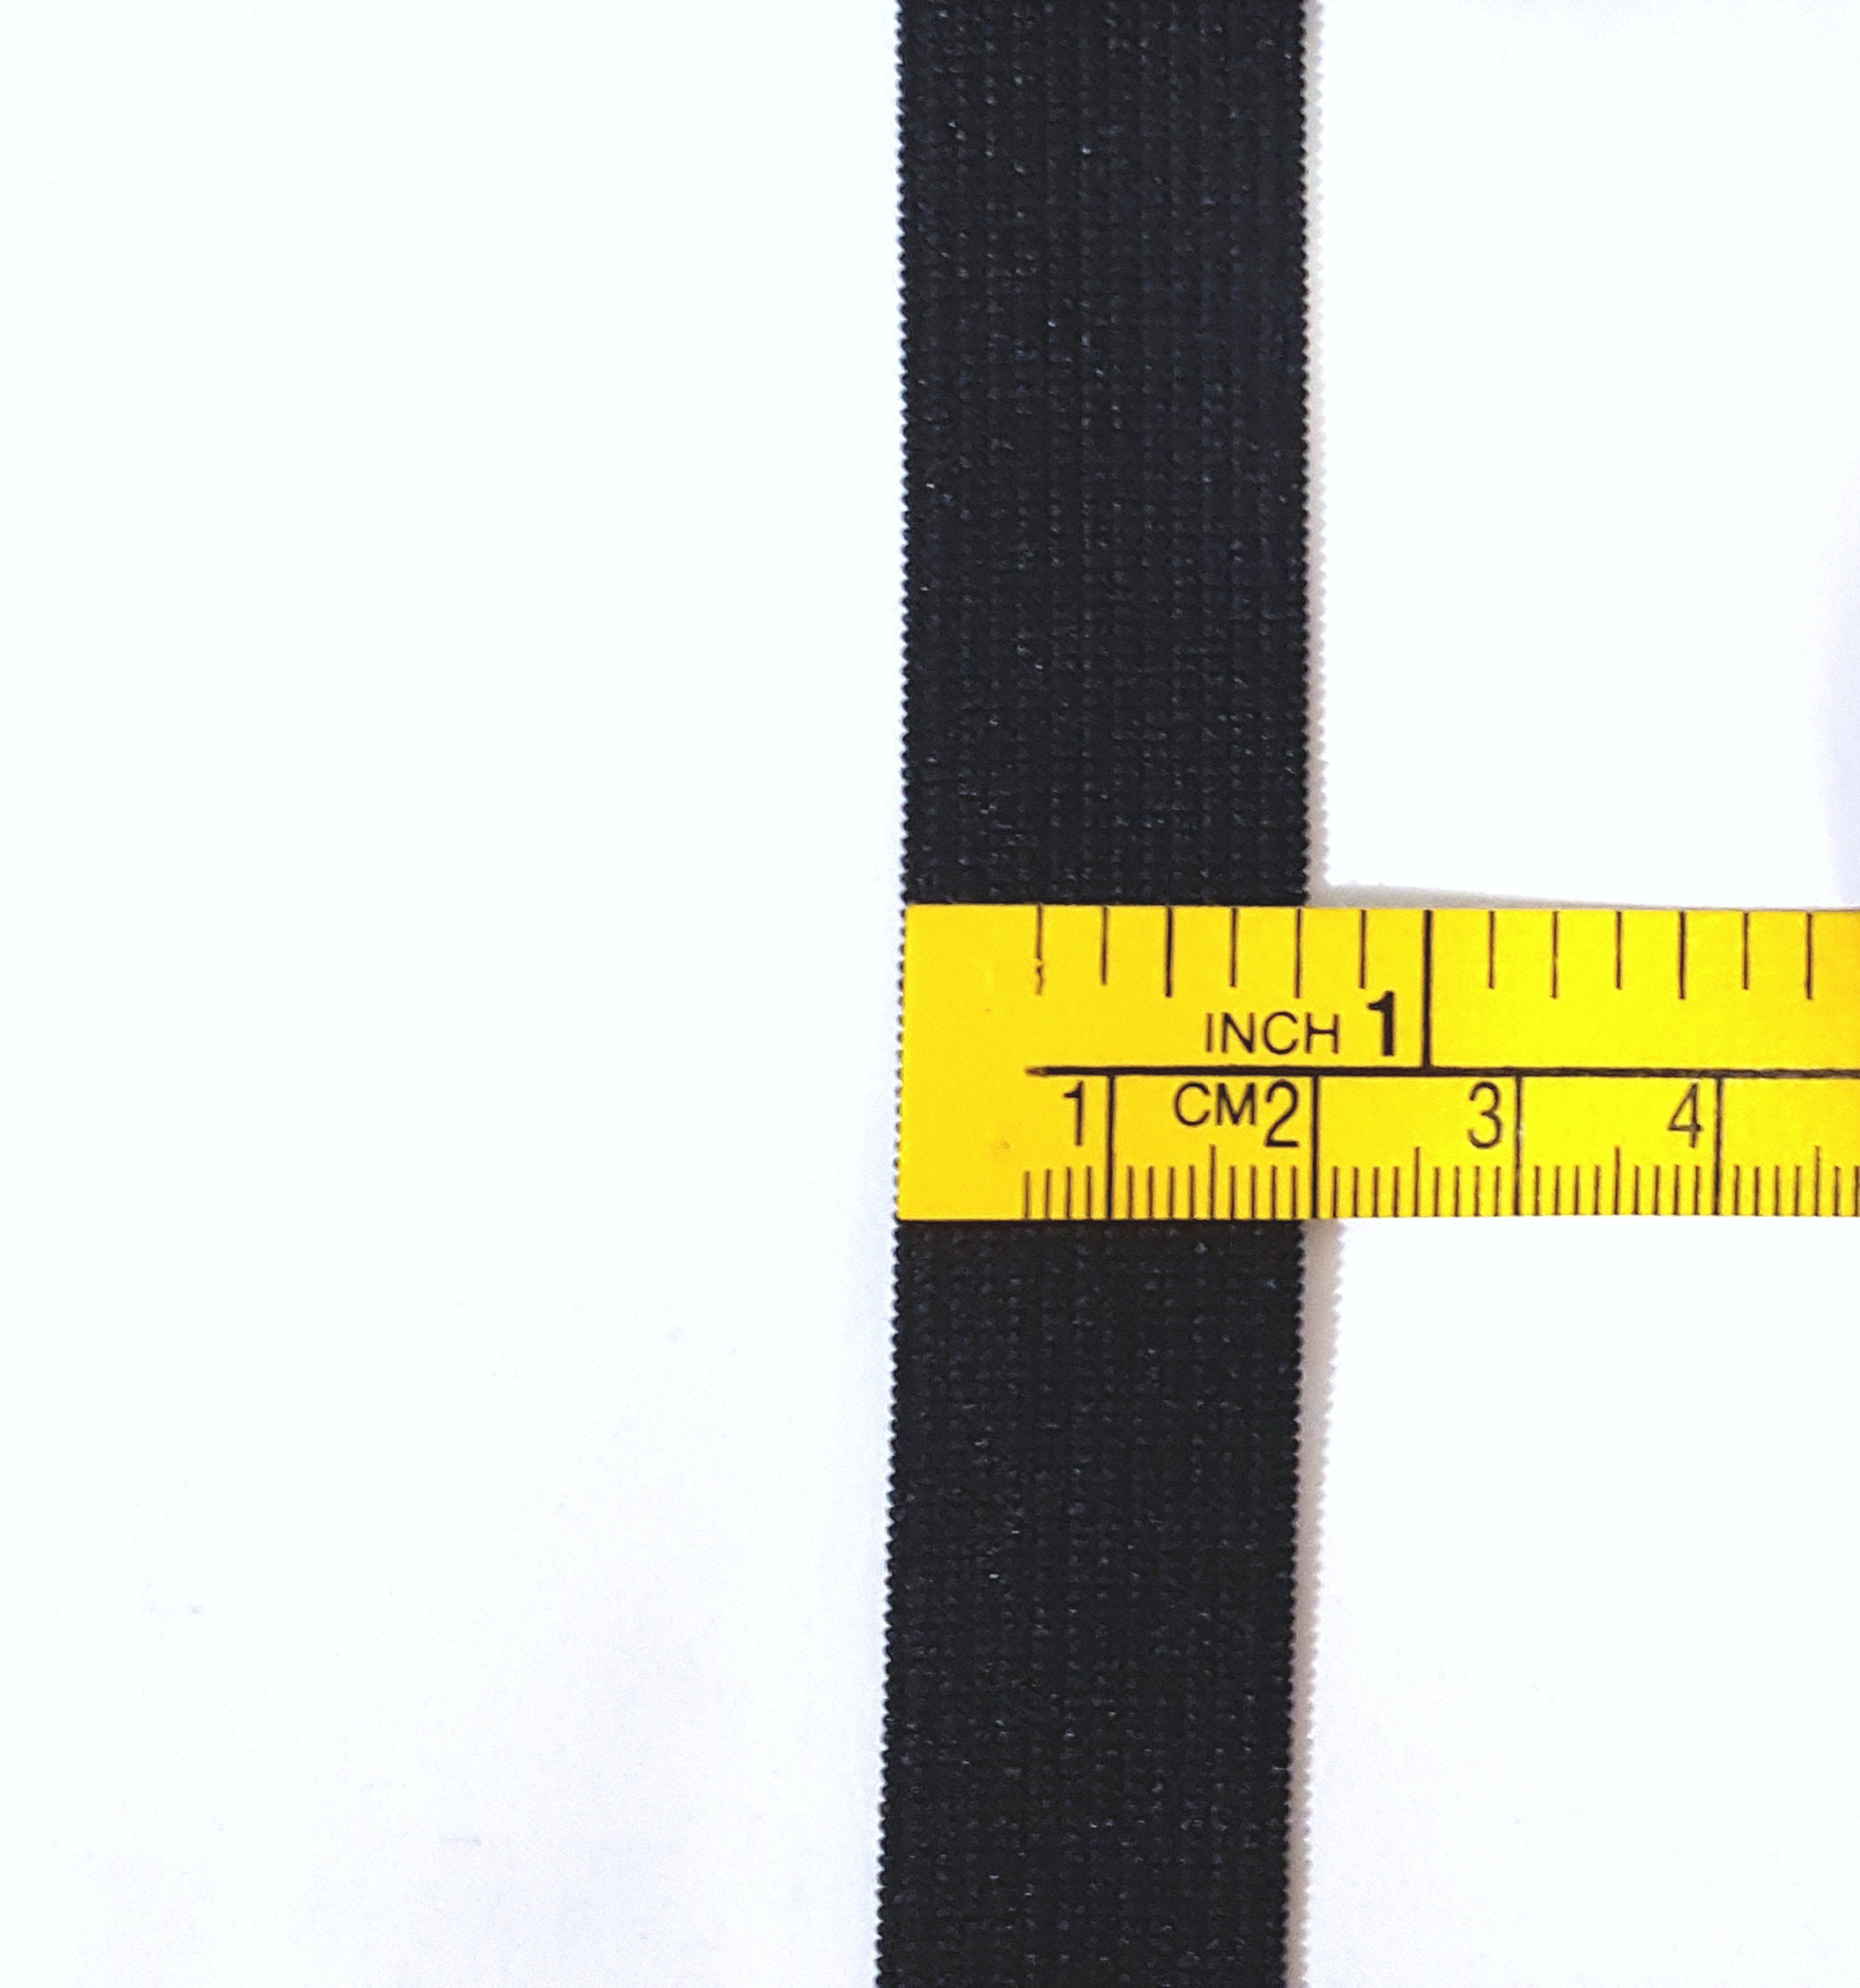 1/2 / 13mm or 3/4 / 20mm wide 5-10yds Thick Black Waistband Elastic Band  EB63